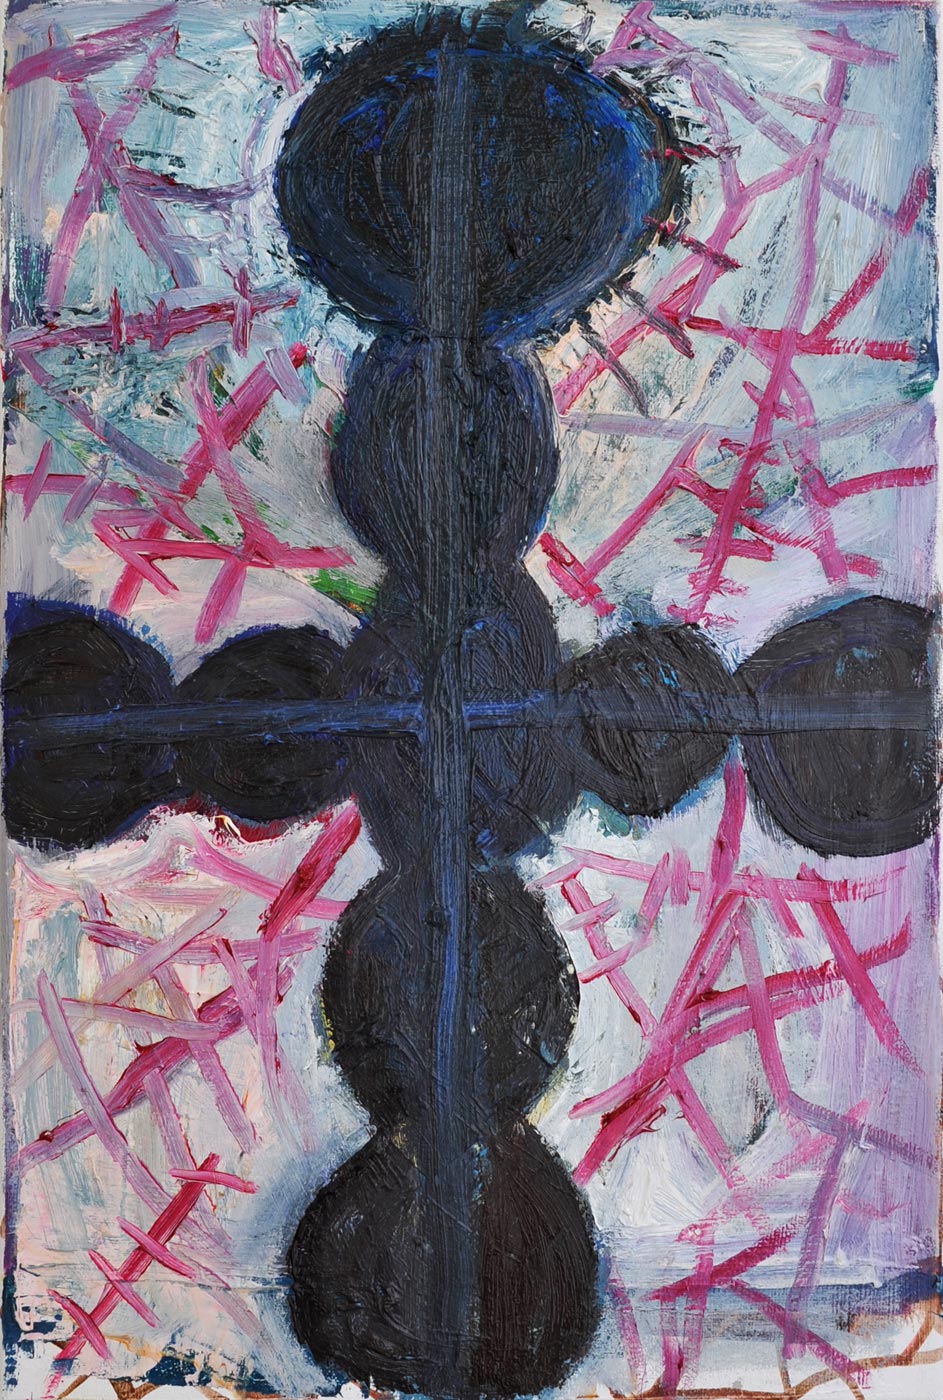 Manuel  Ocampo - Cross with Wounds, 2013